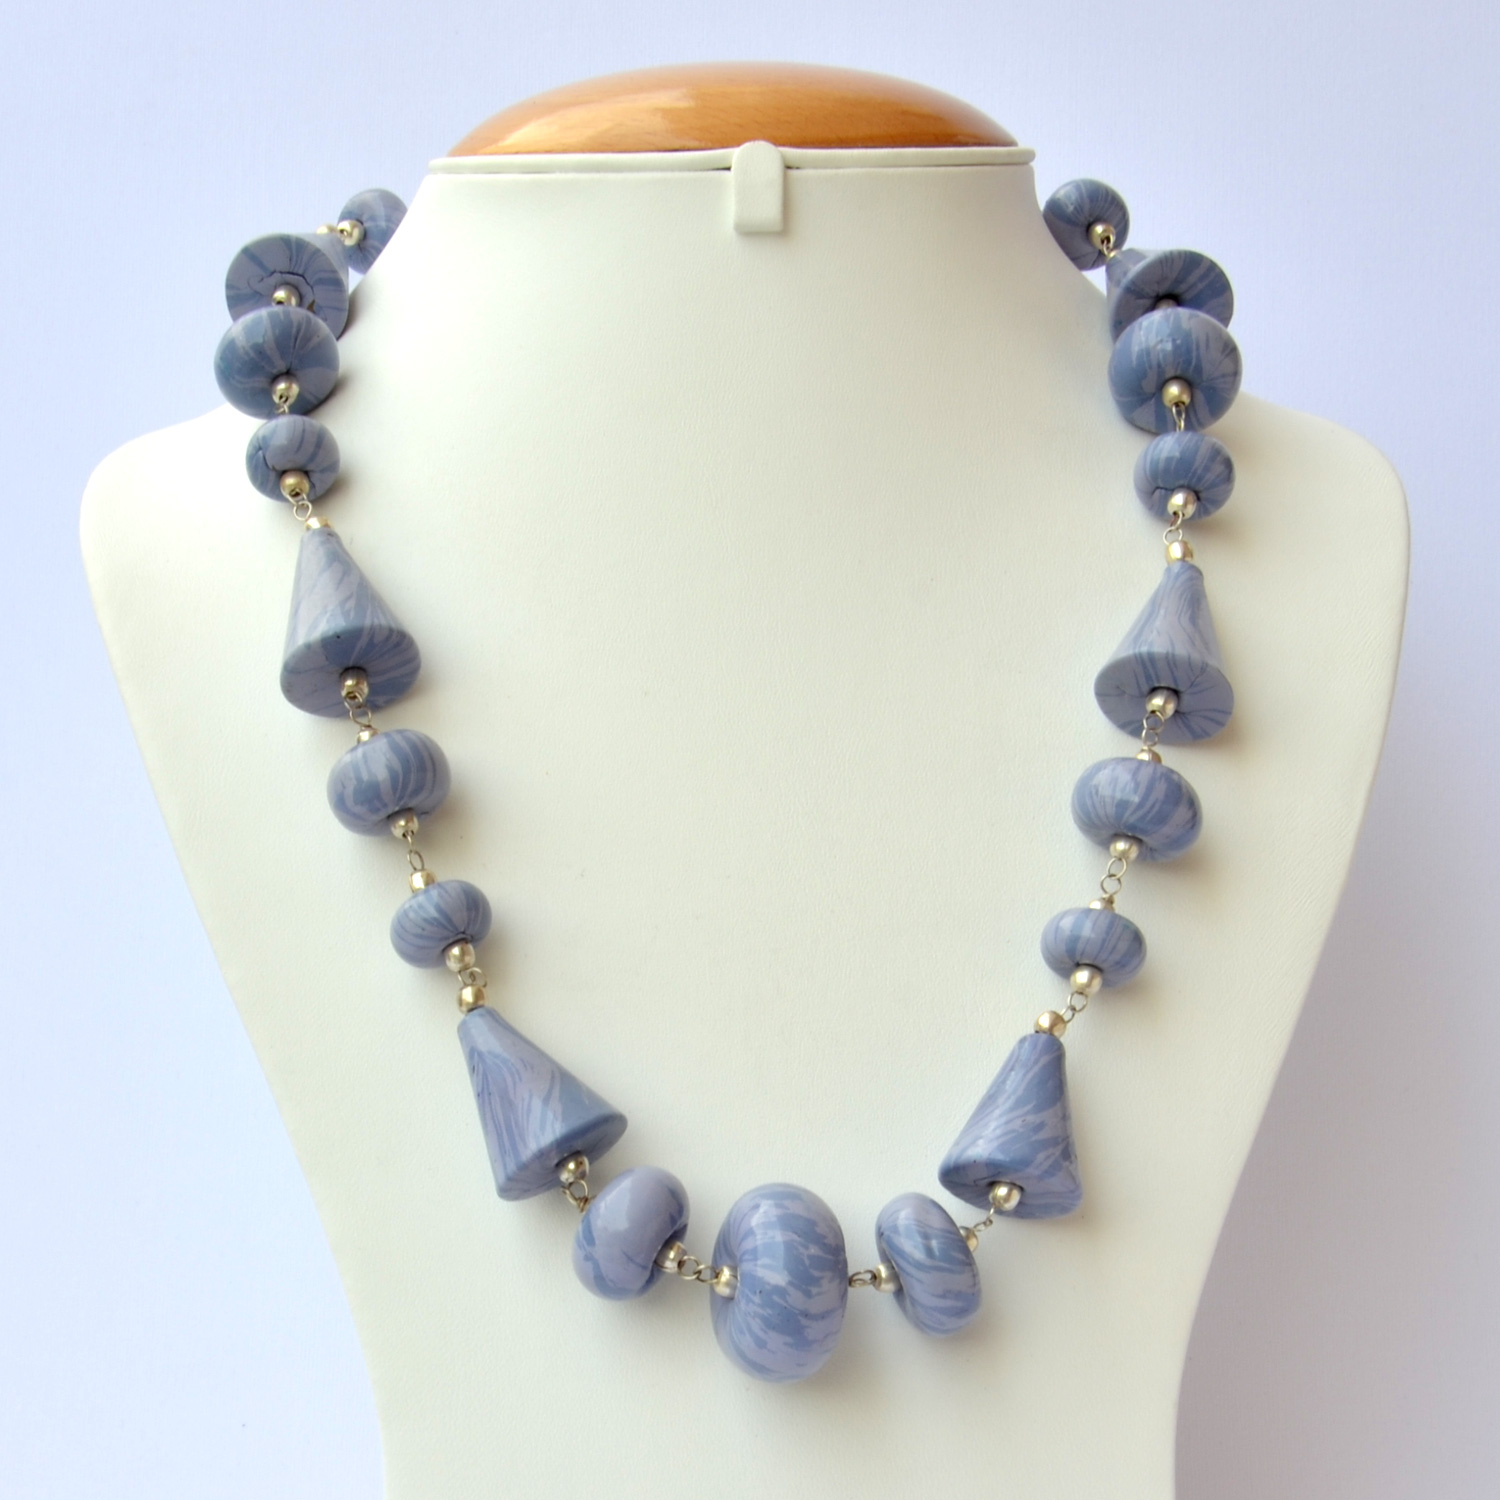 Handmade Necklace with Disc Shaped Dark & Light Color Blue Beads ...